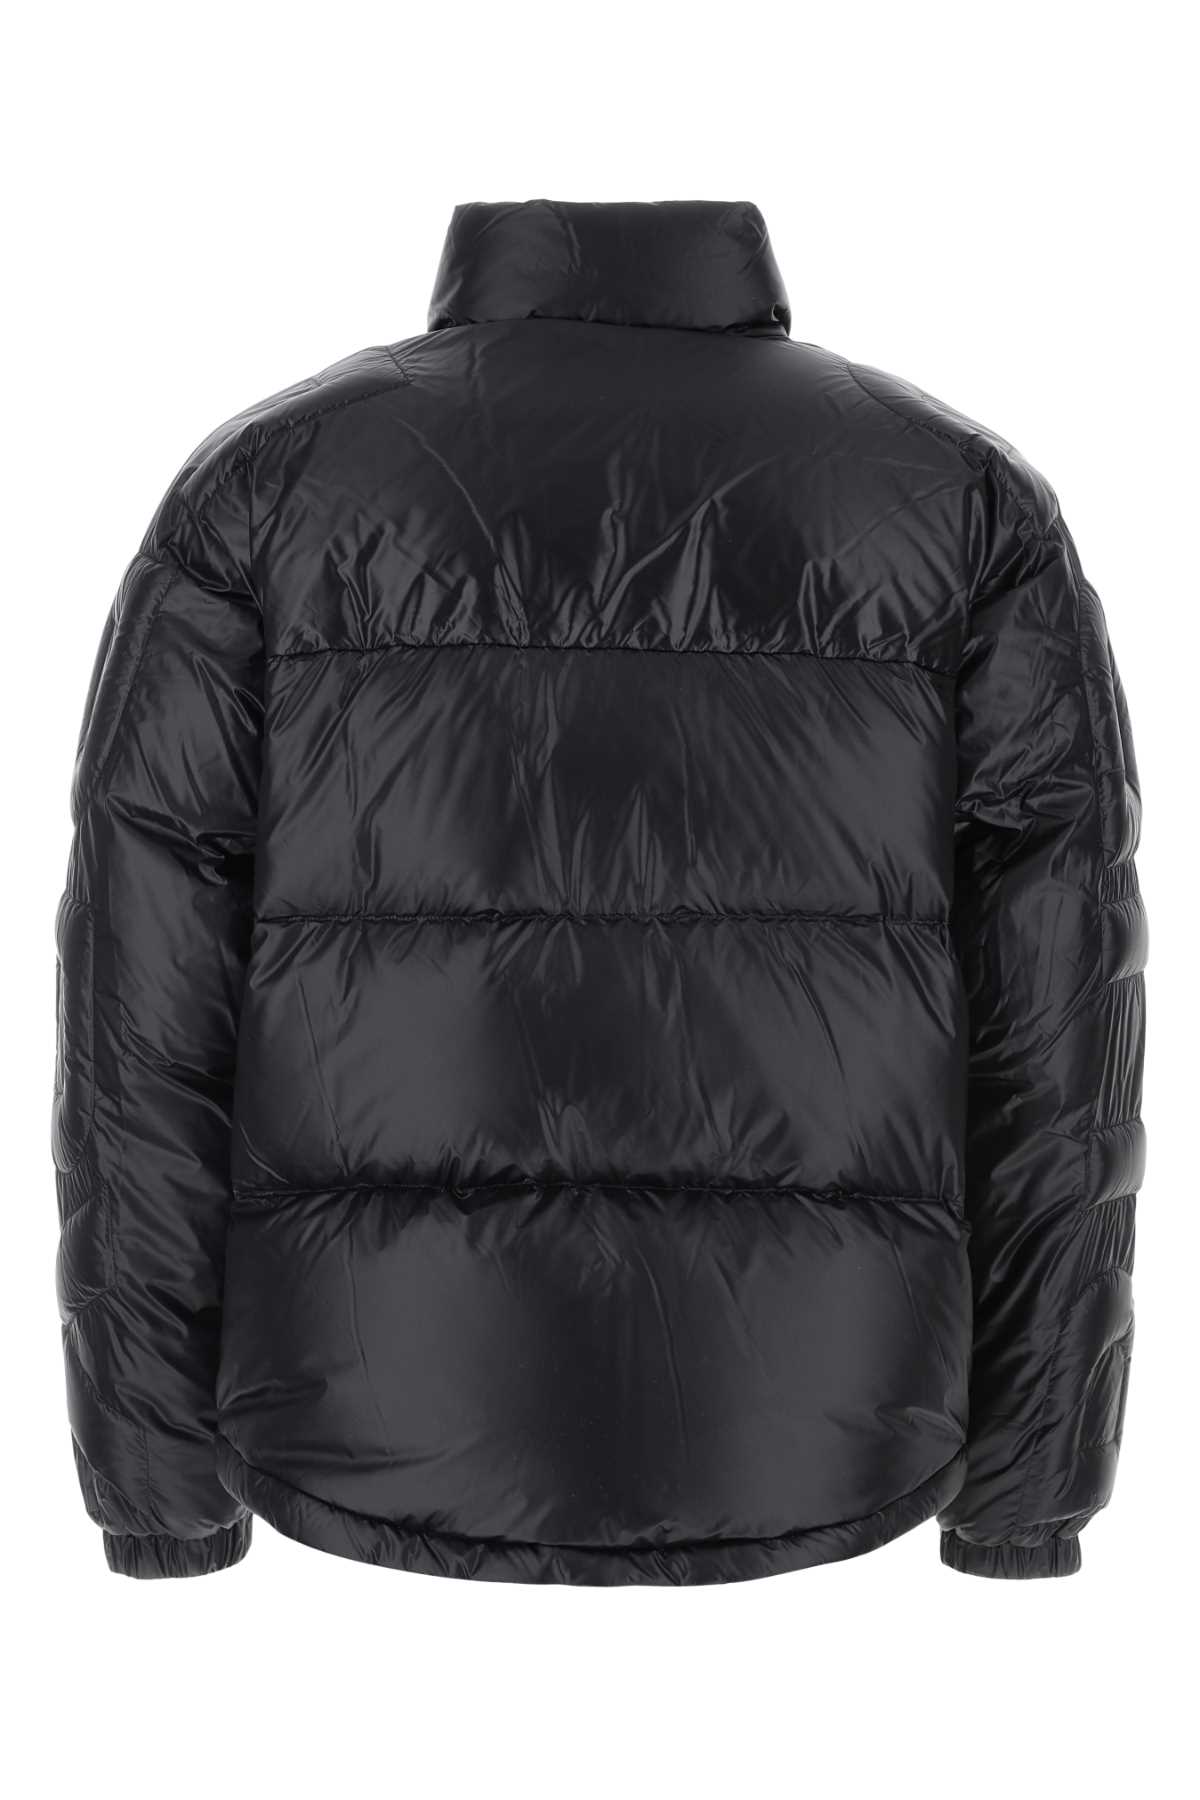 Burberry Black Nylon Down Jacket In A1189